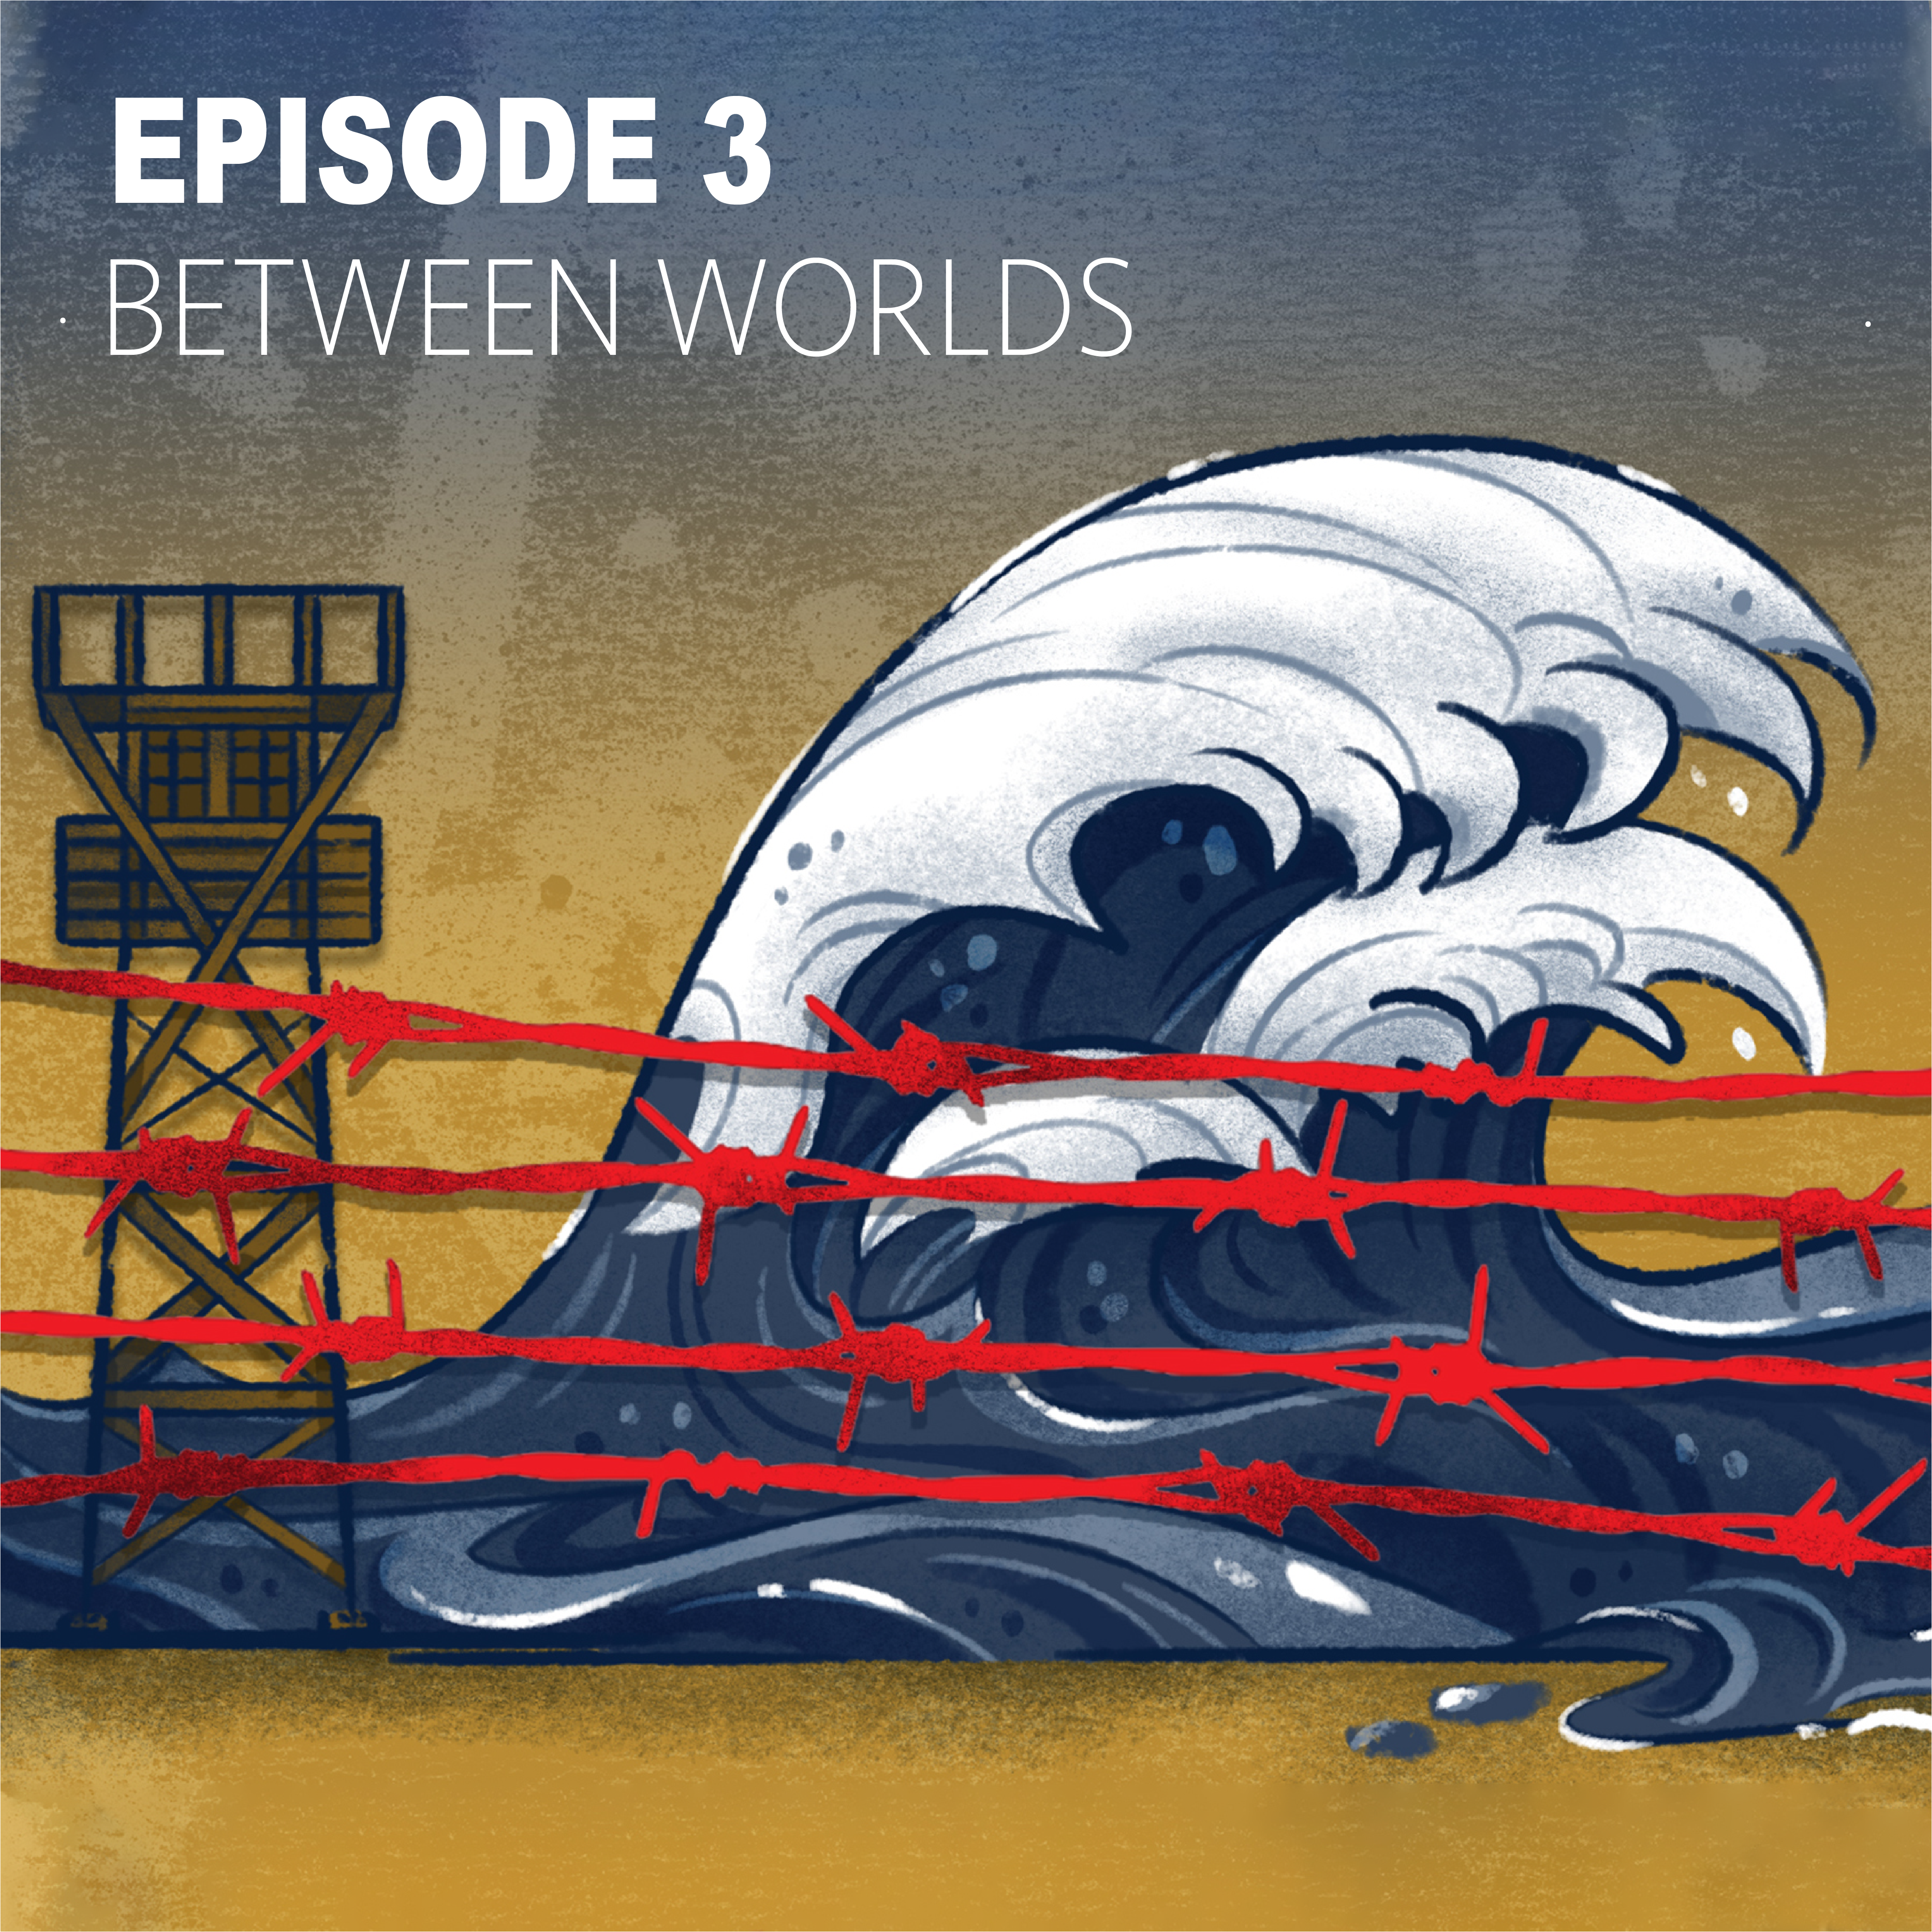 This graphic illustration depicts a large wave and guard tower behind barbed wire with text above that reads, "Episode 3: Between Worlds"